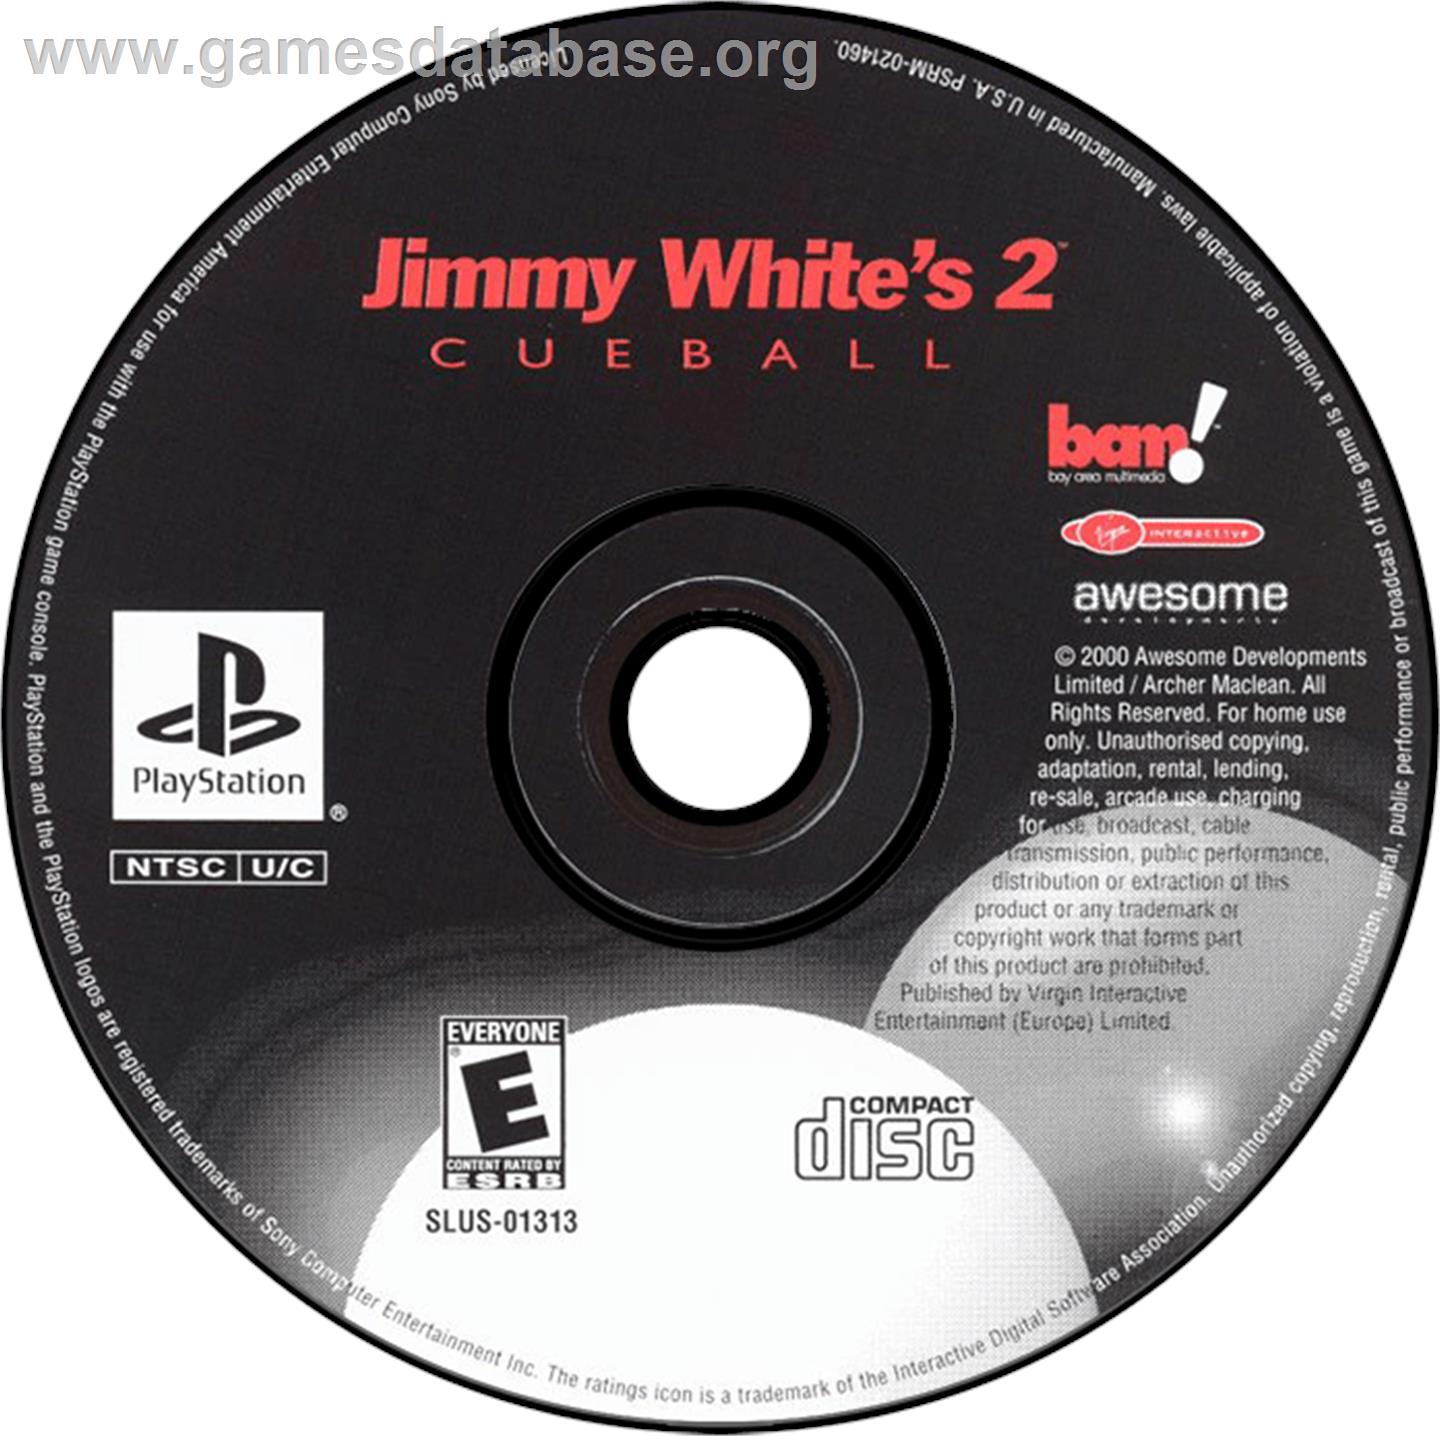 Jimmy White's 2: Cueball - Sony Playstation - Artwork - Disc